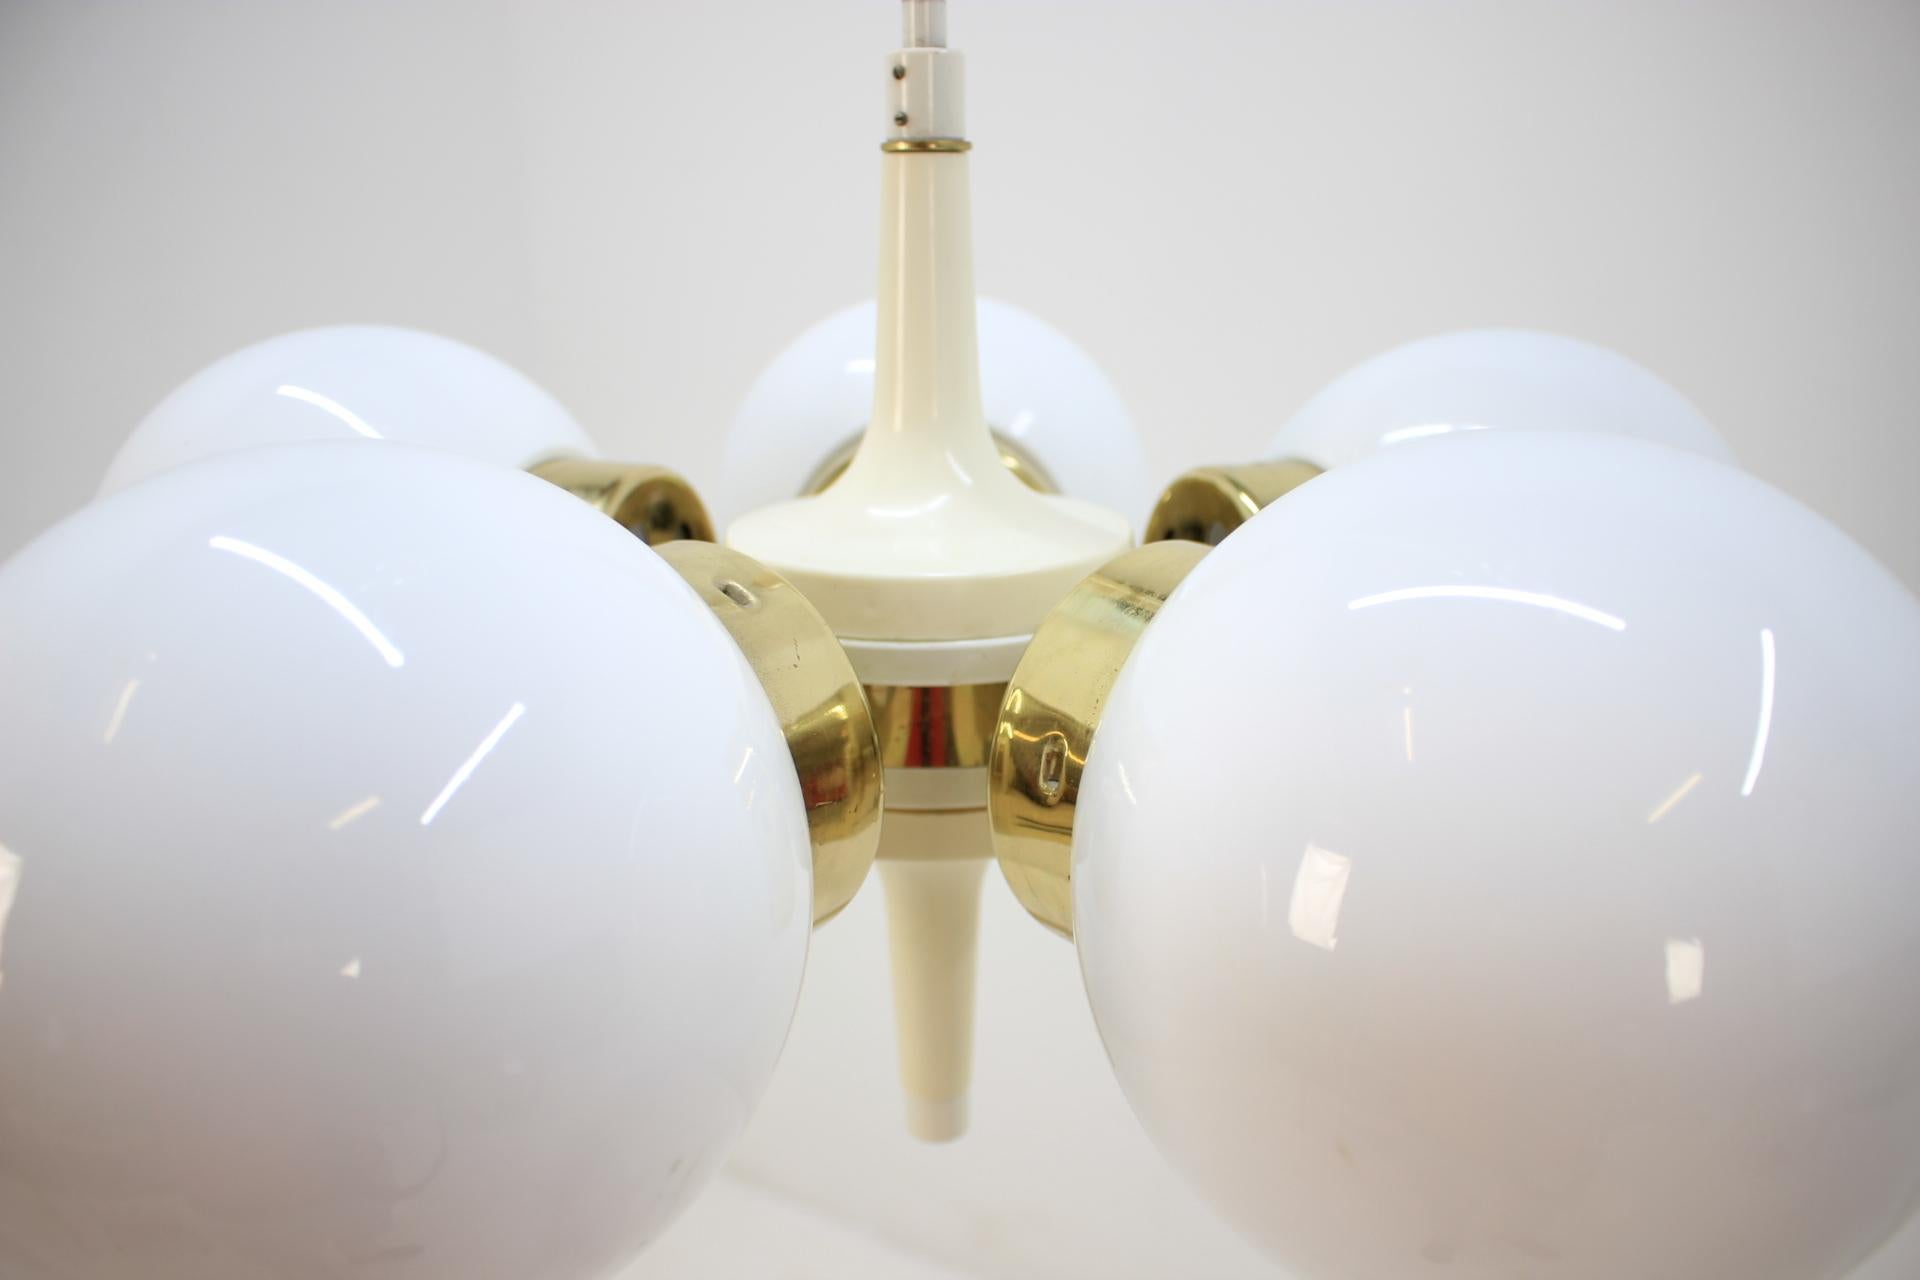 - chandelier or pendant
- Space age style
- very nice style of lighting